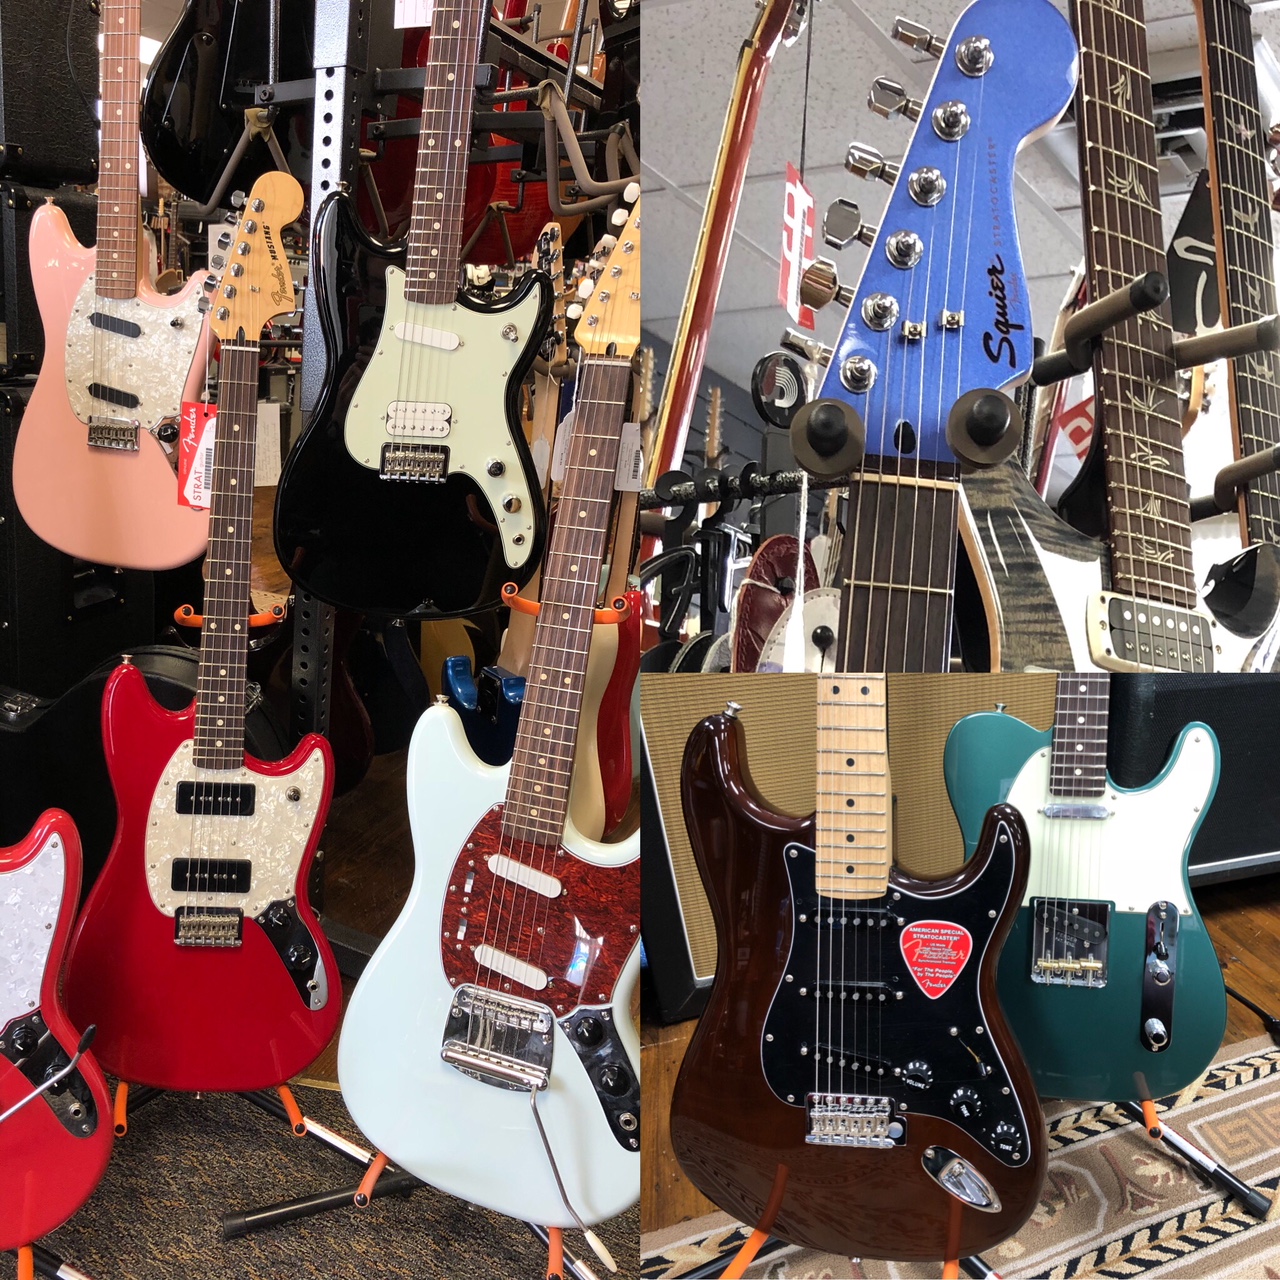 As an "Authorized Fender Dealer" we have the BIGGEST and BEST selection of Fender Acoustic guitars, Electric Guitars, Amps, and Bass Guitars(both electric and acoustic). Our Fender selection is always evolving with both new and used equipment. Will West Music and Sound's in-house Inventory is second to none!